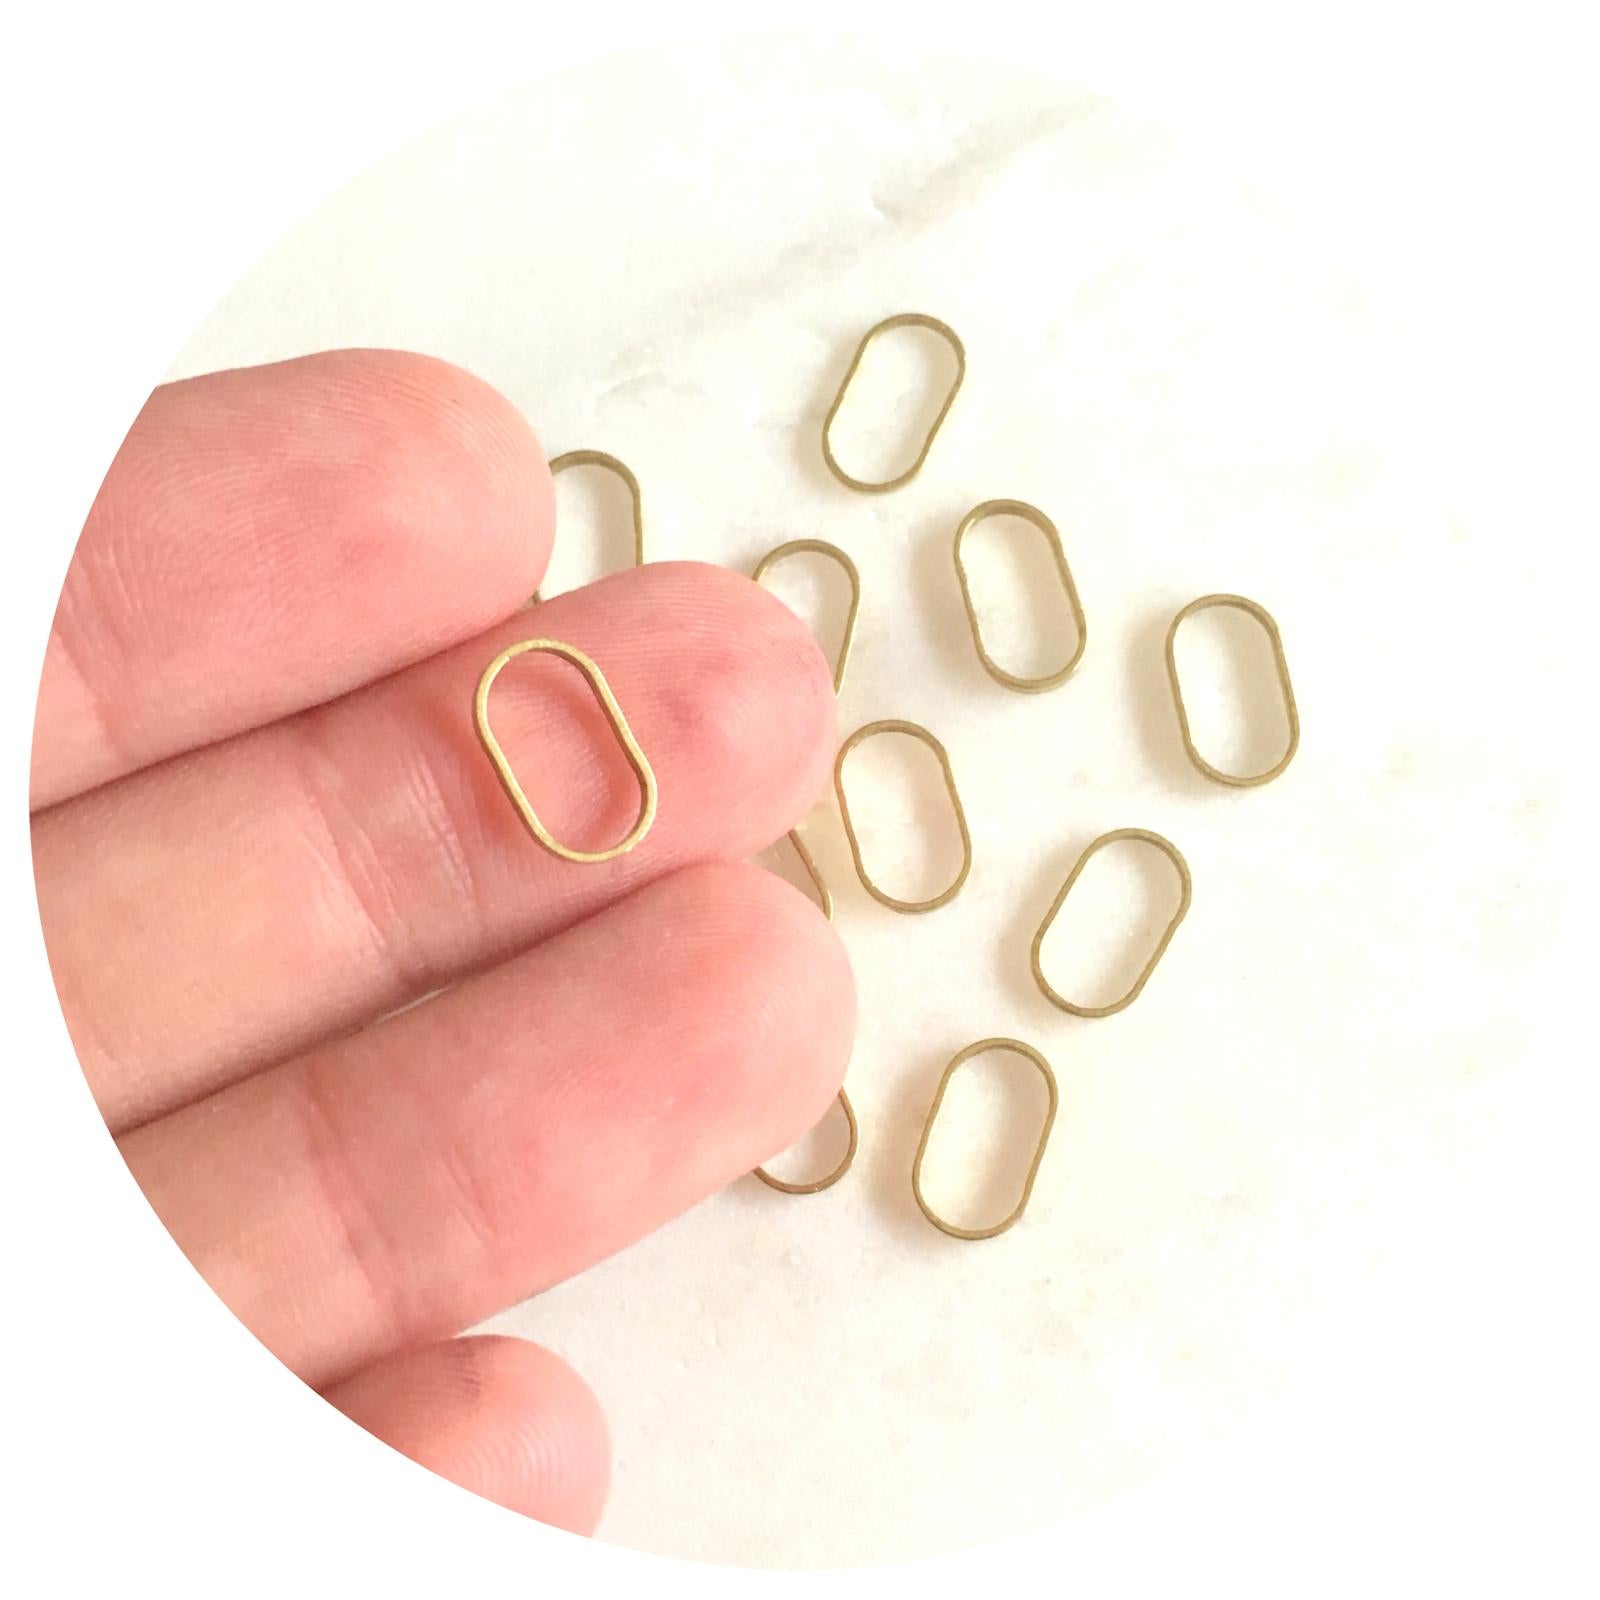 10mm Oval Connector - Raw Brass - 2 pcs - 1171BR